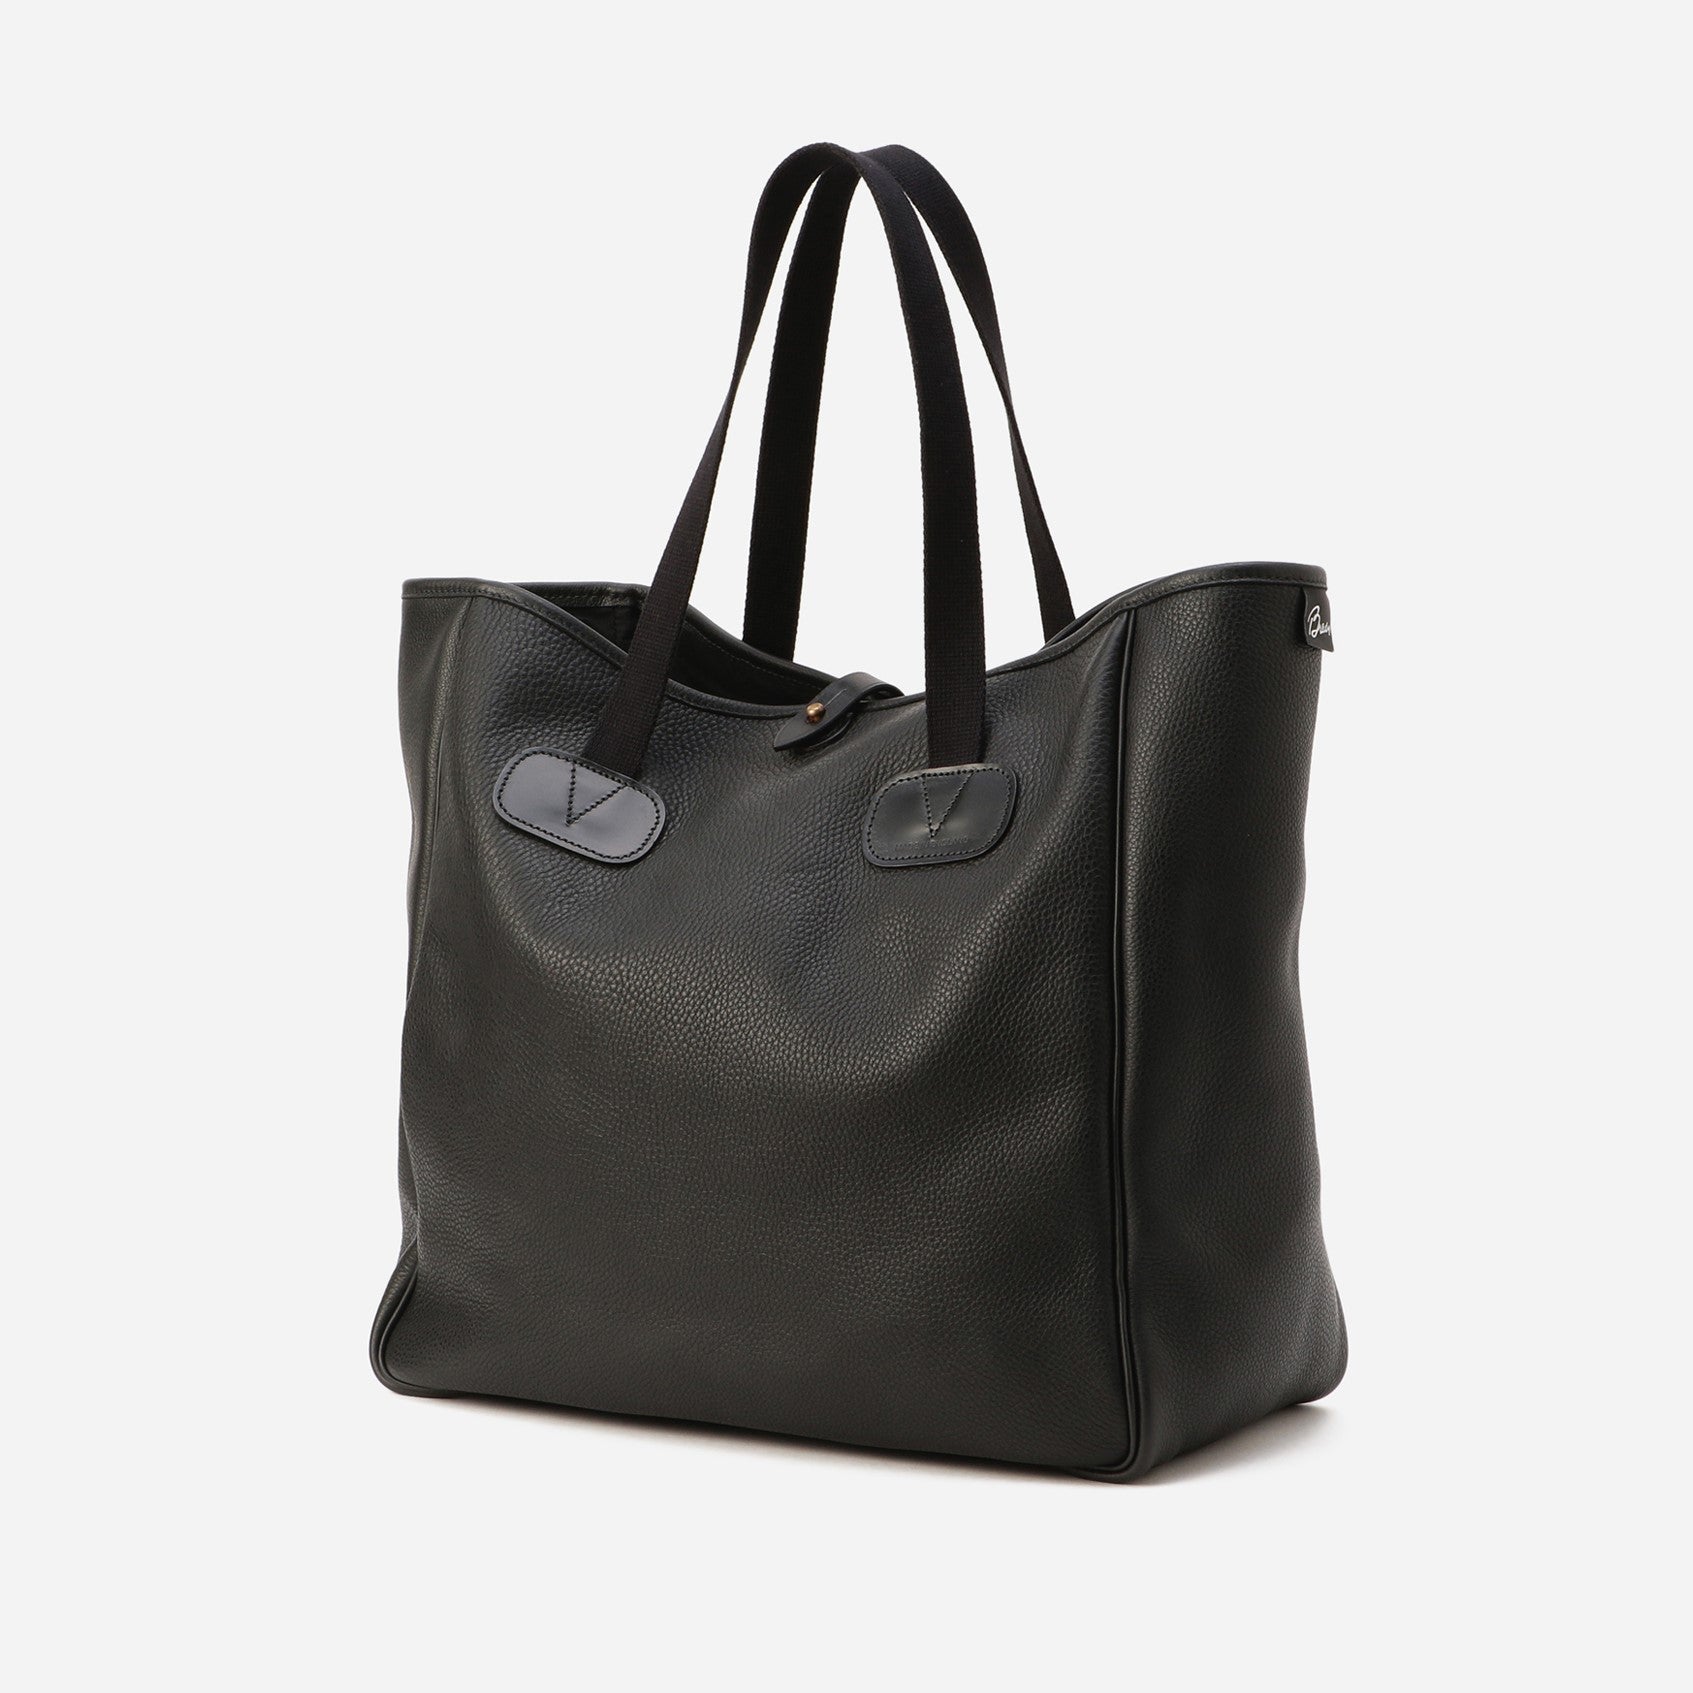 SMALL CARRYALL LEATHER